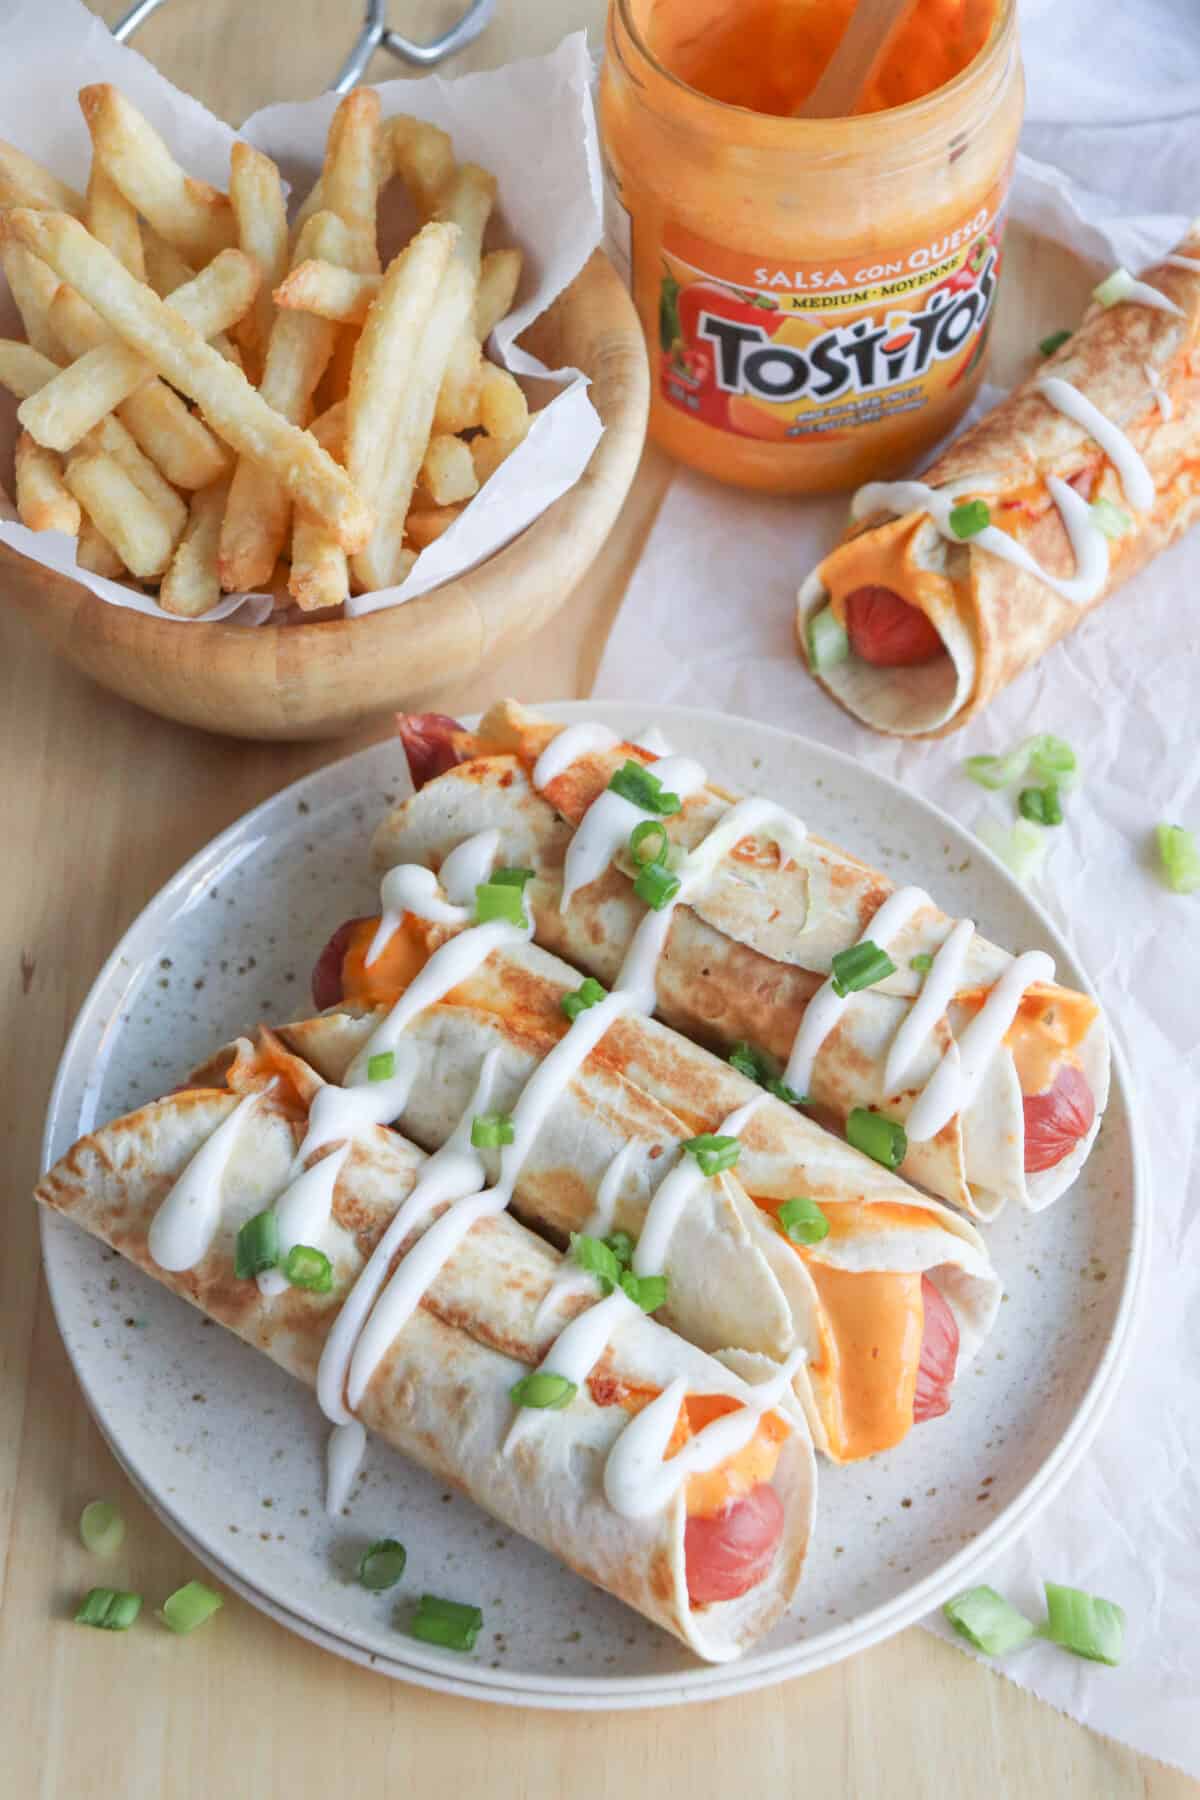 Three hot dogs wrapped in tortillas on a cream plate surrounded by a bowl of fries and a jar of open queso.